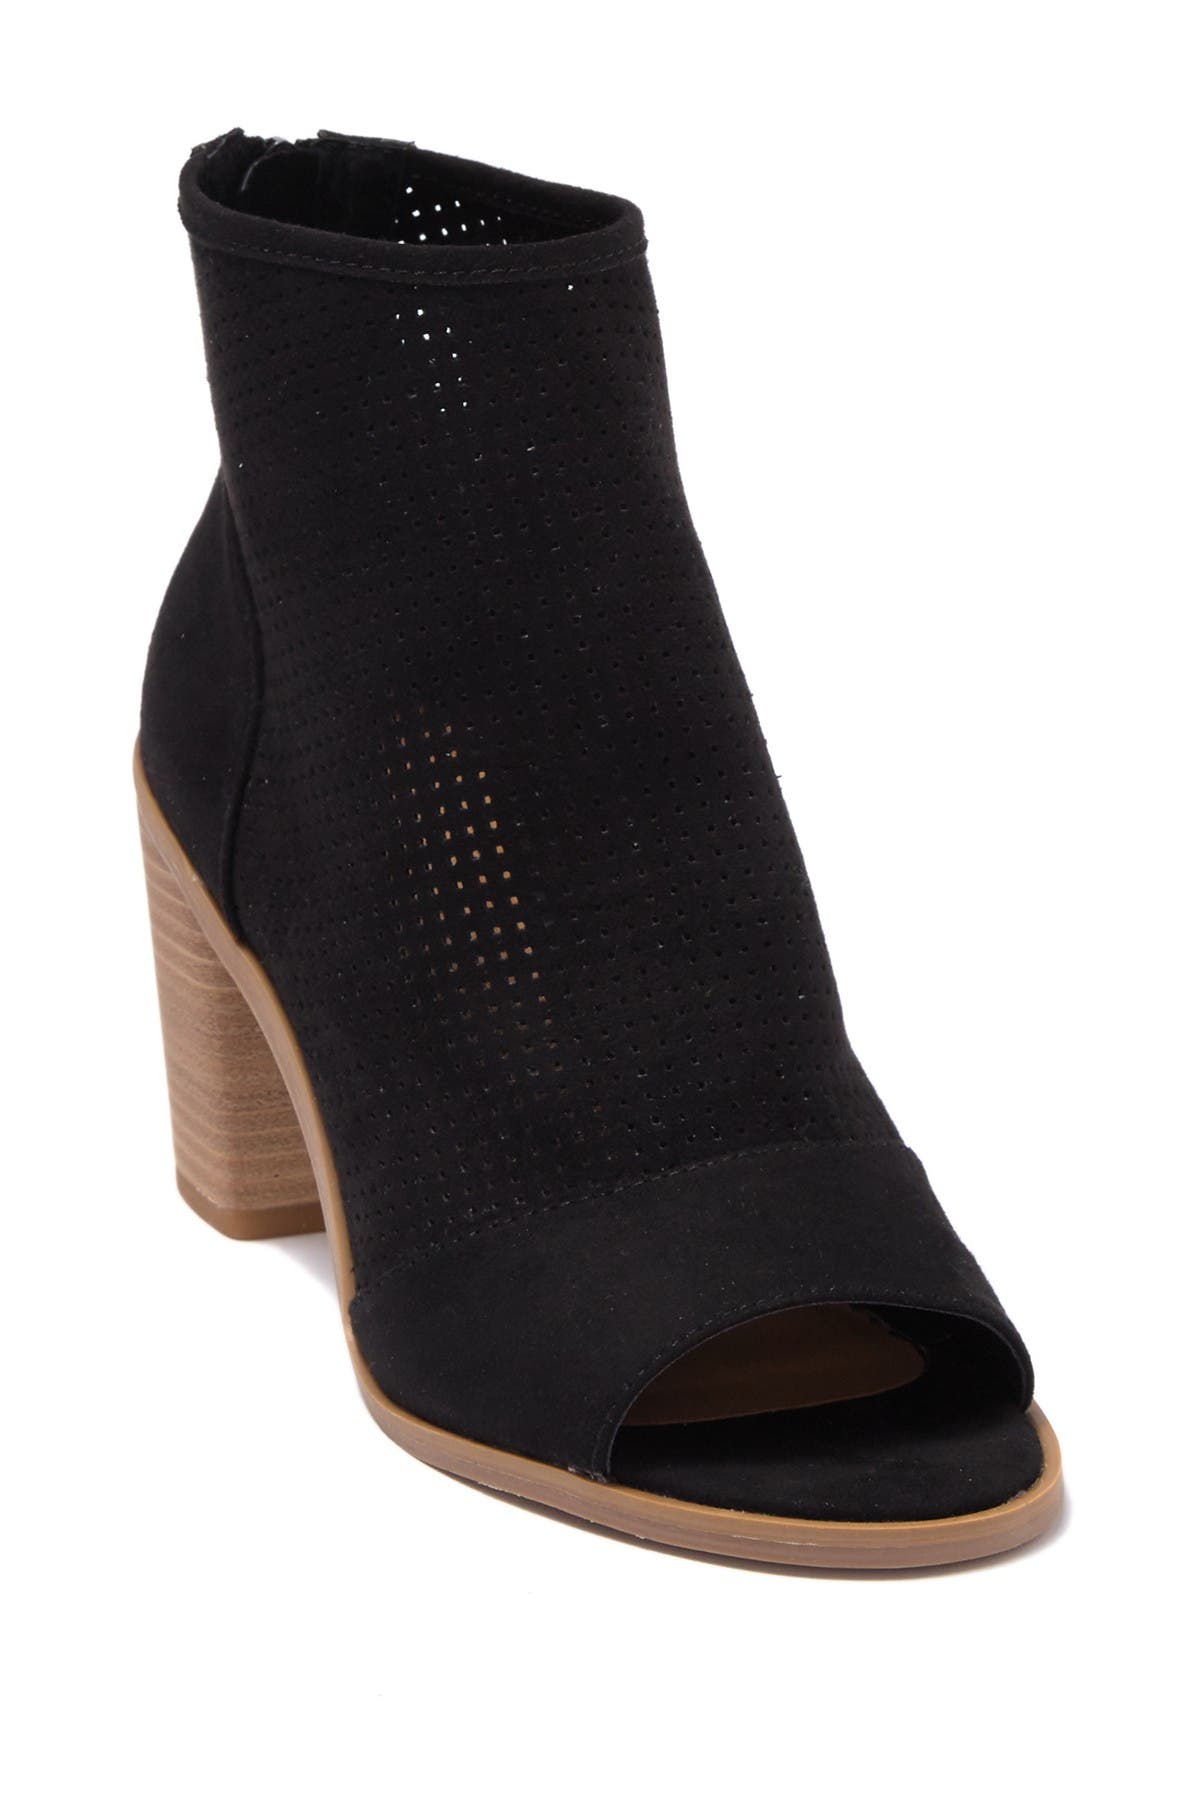 Abound | Perforated Peep Toe Bootie 